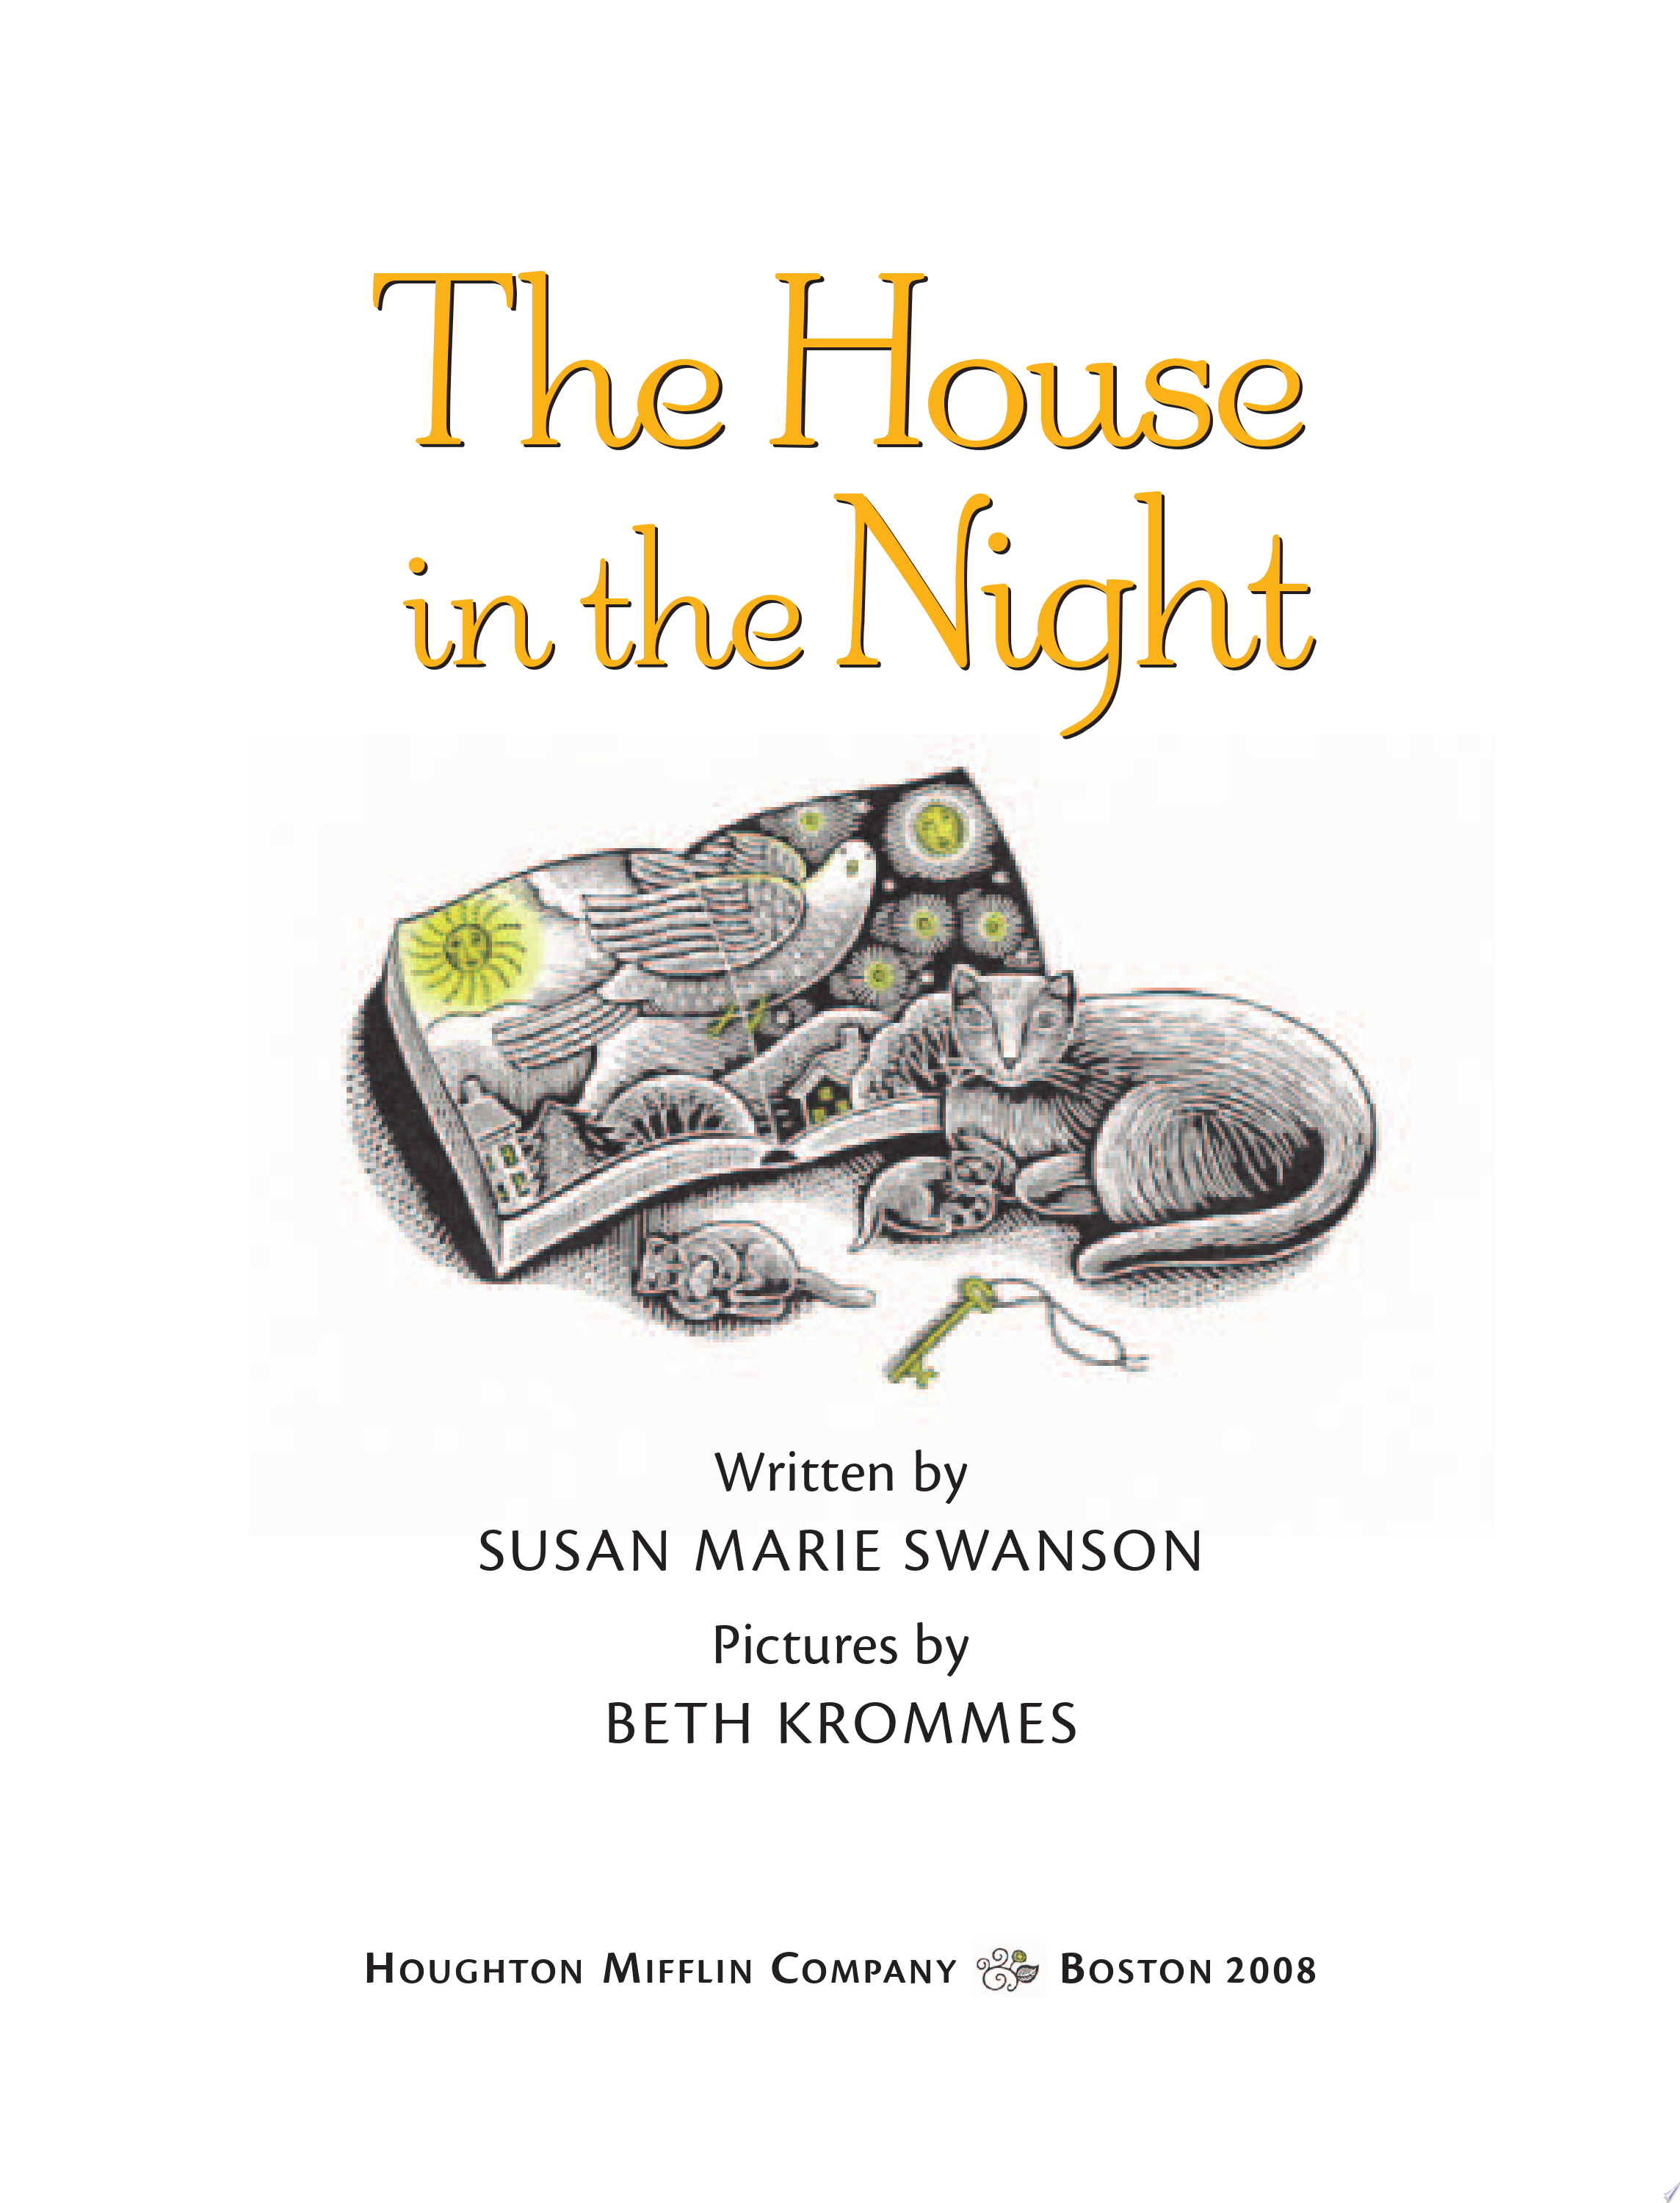 Image for "The House in the Night"